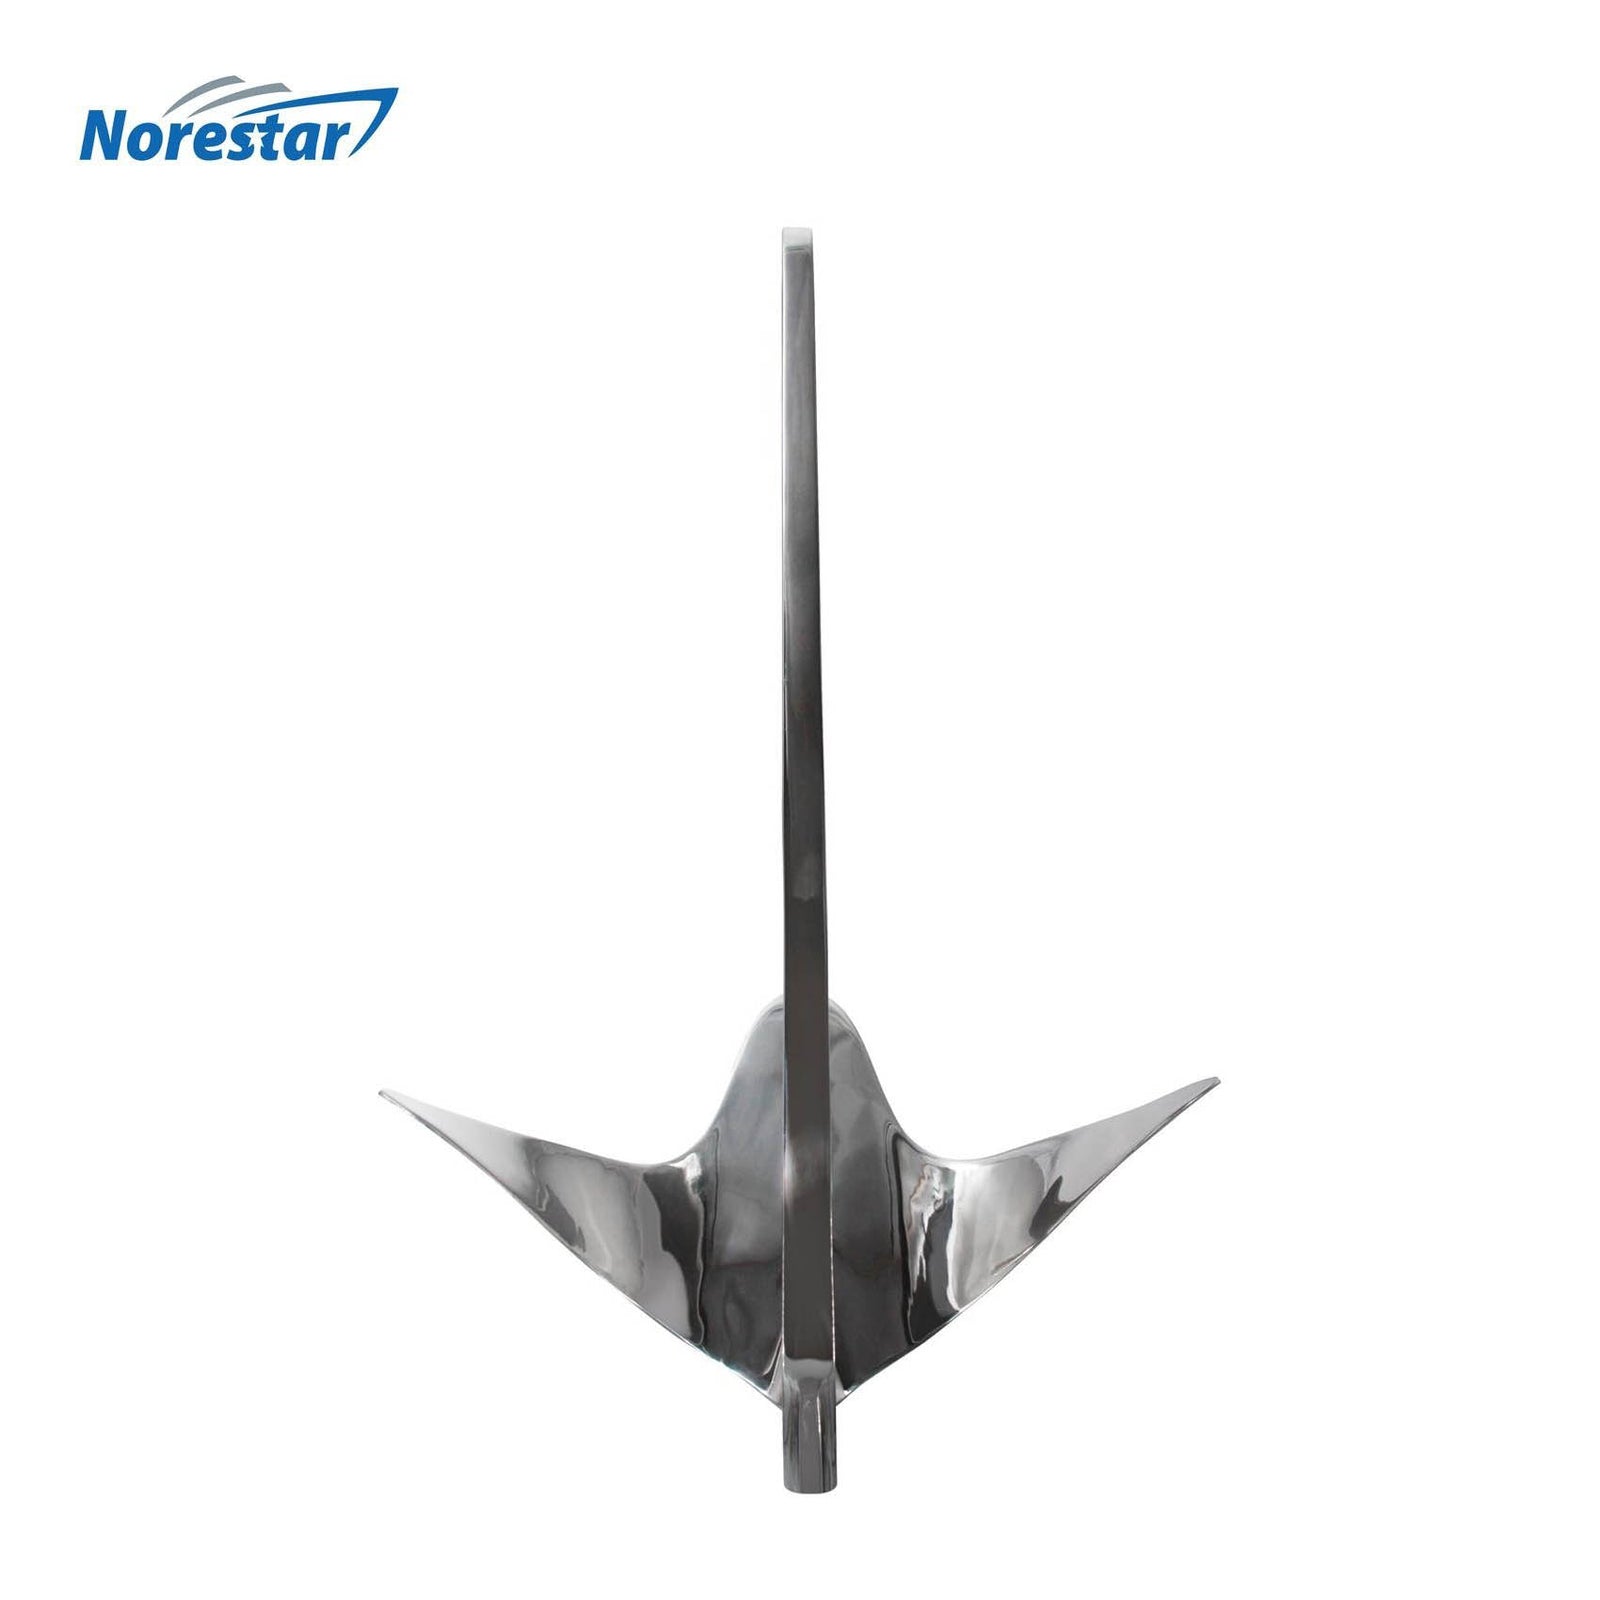 Stainless Steel Bruce/Claw Boat Anchor by Norestar - Top